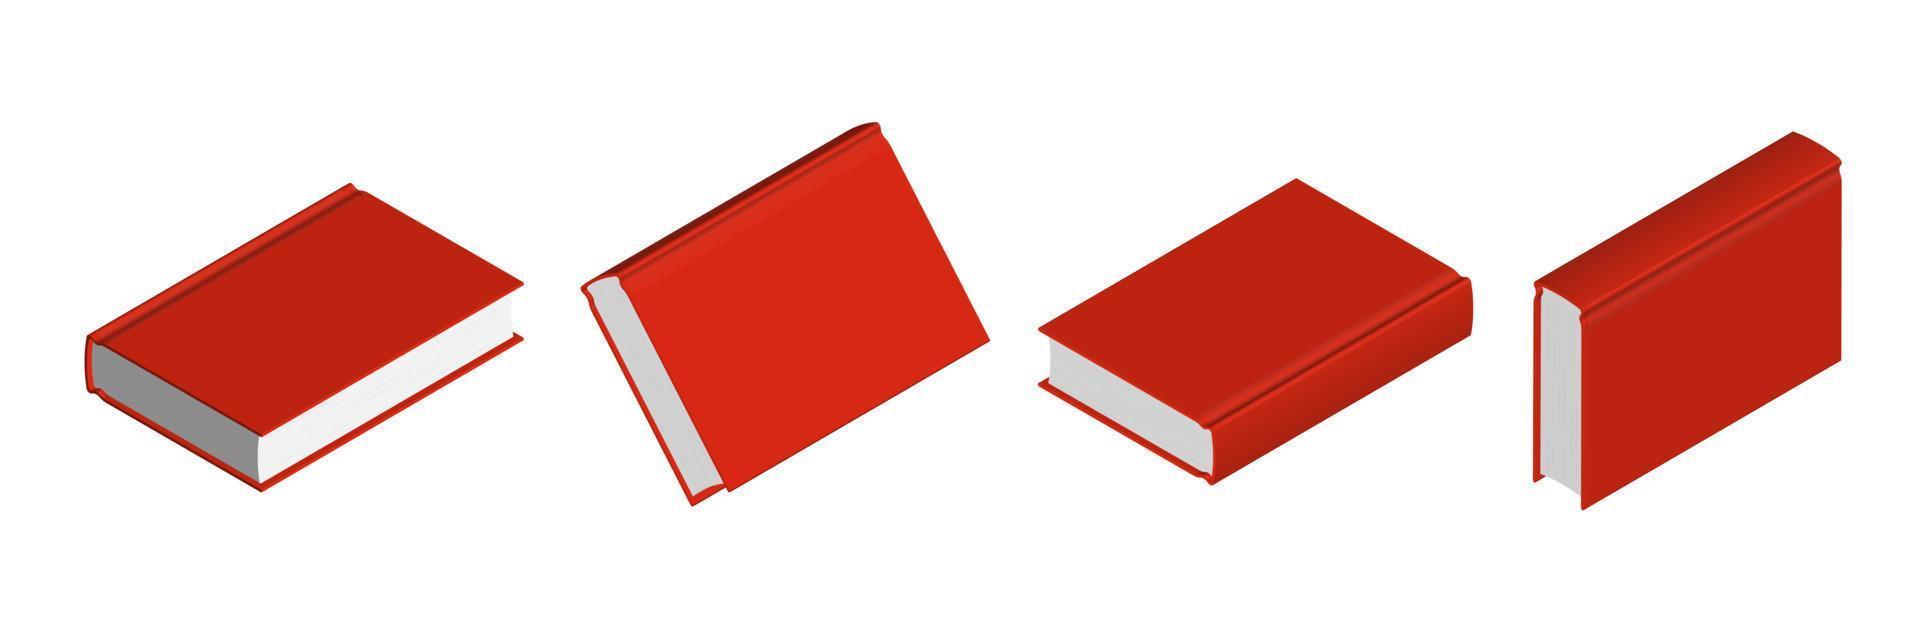 Set of closed red books in different positions for bookstore vector